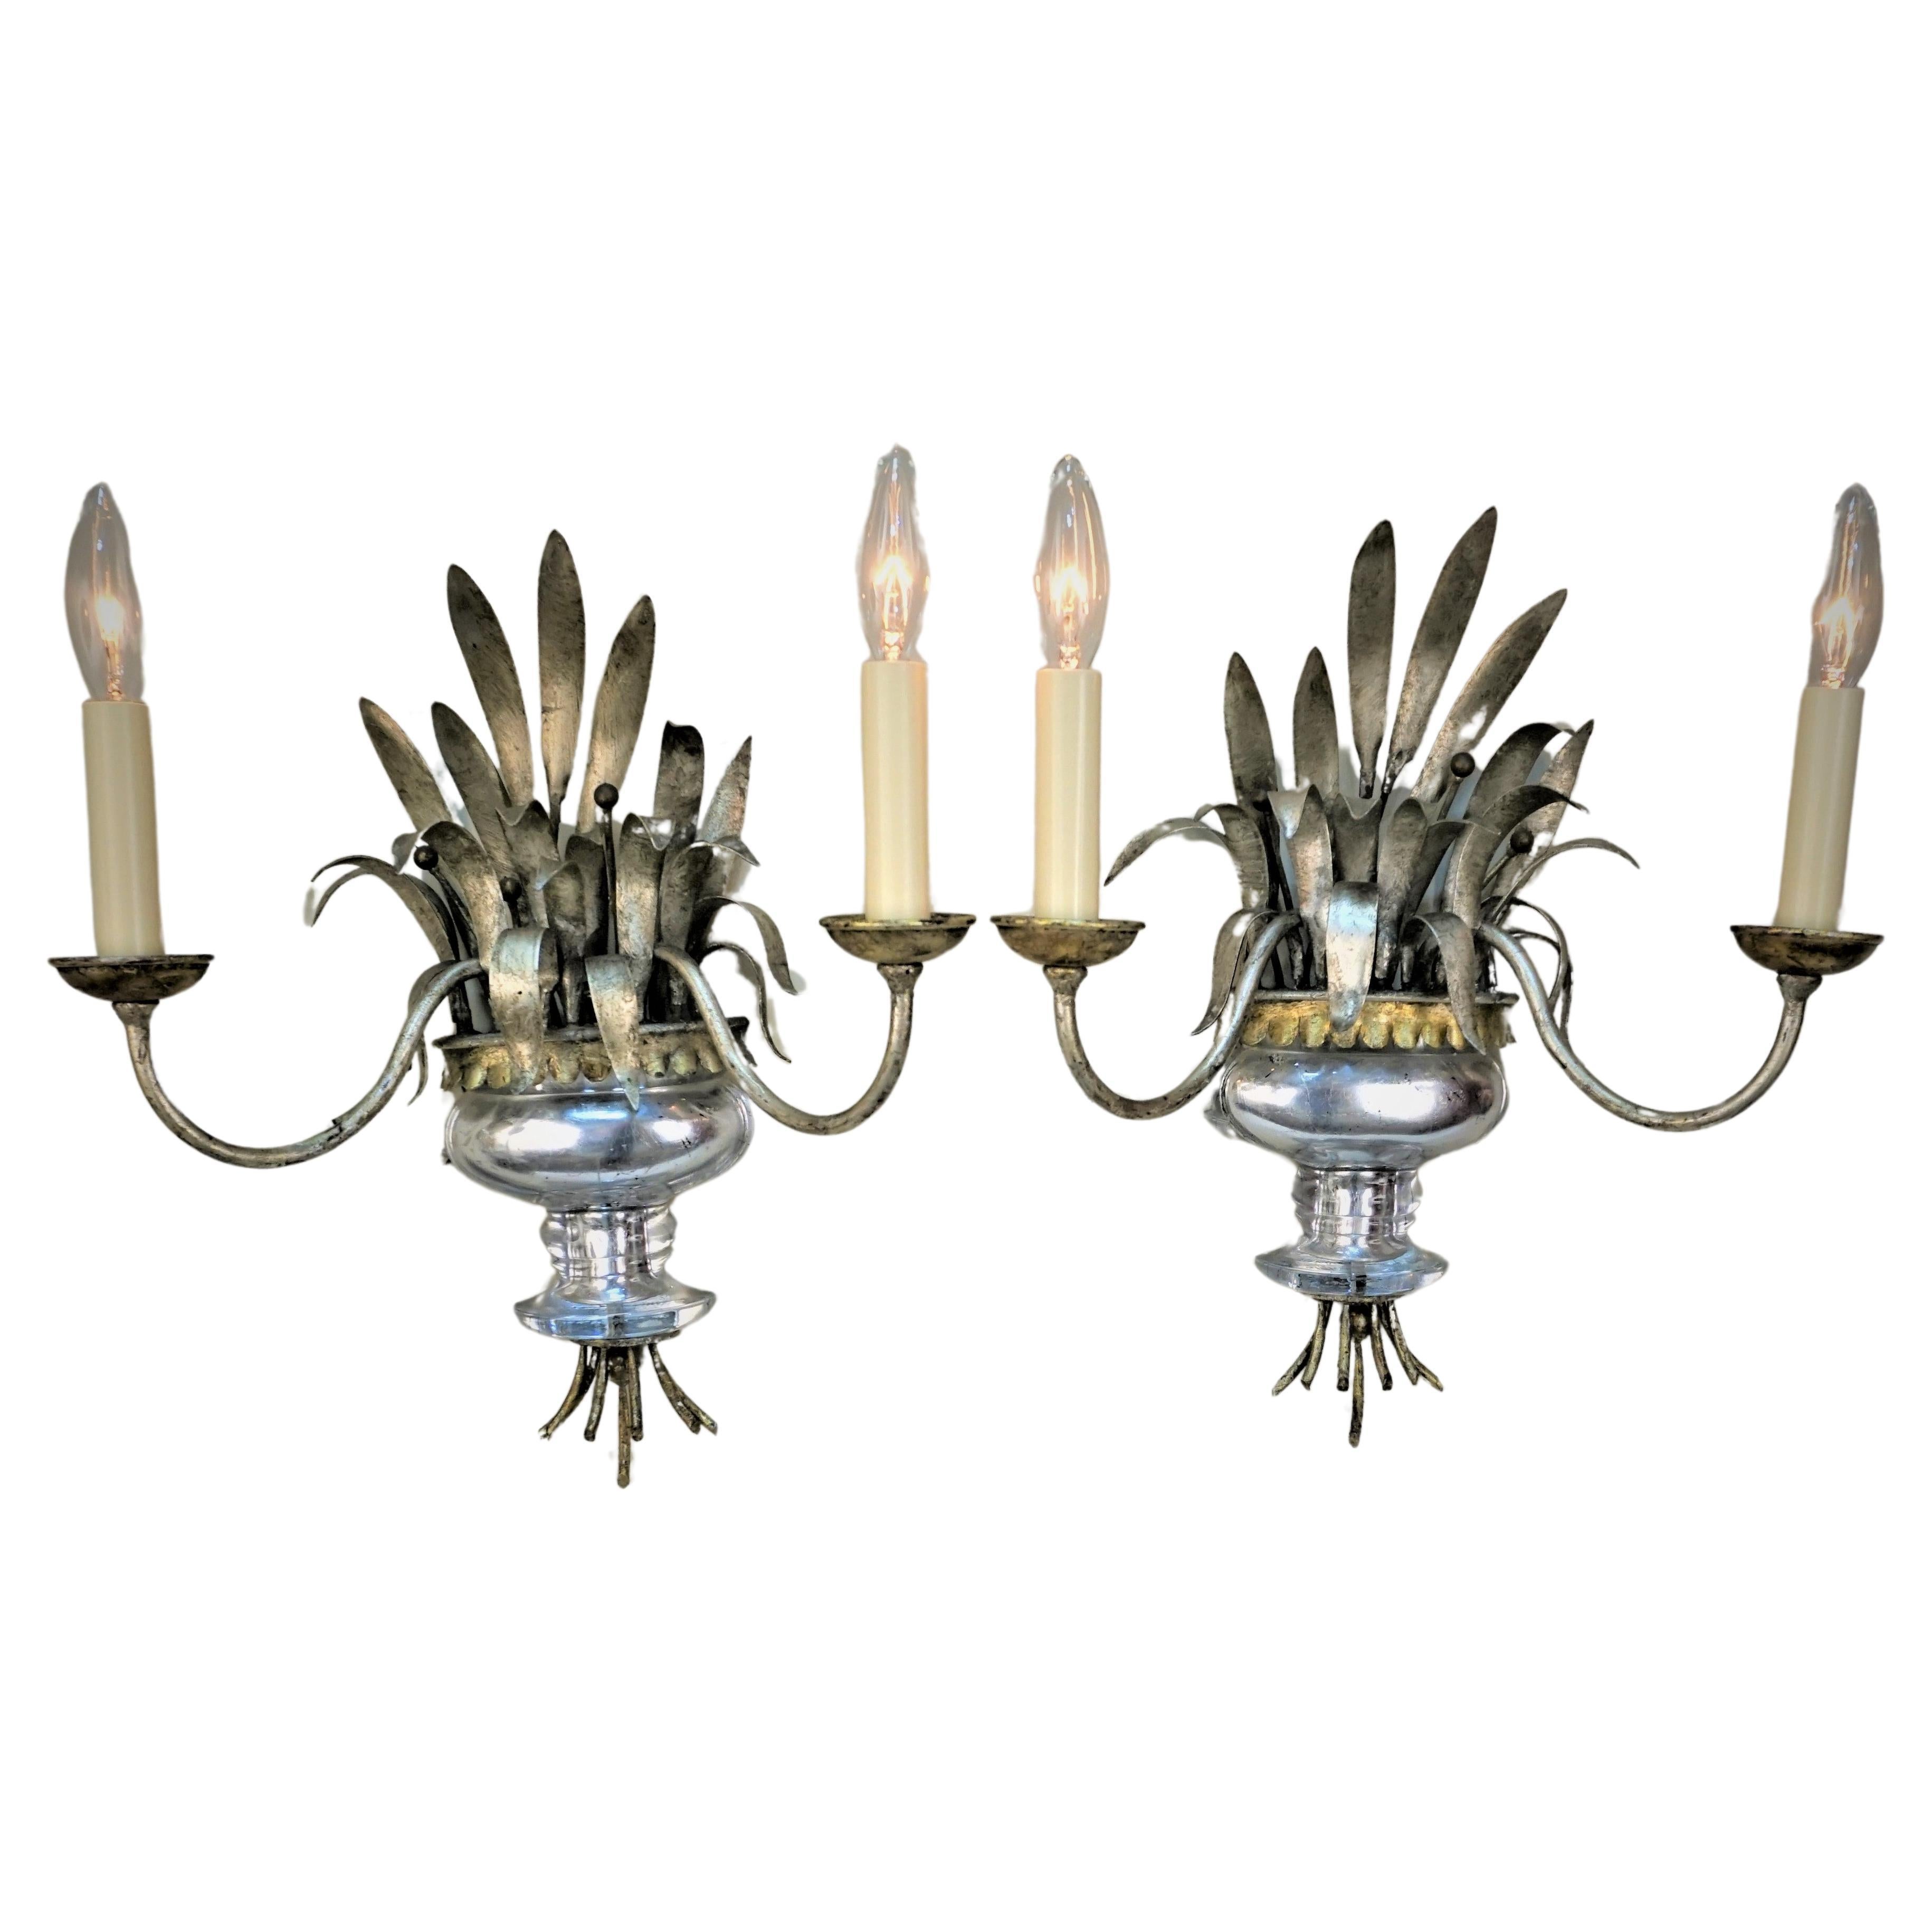  Pair of 1950's French Maison Bagues Wall Sconce